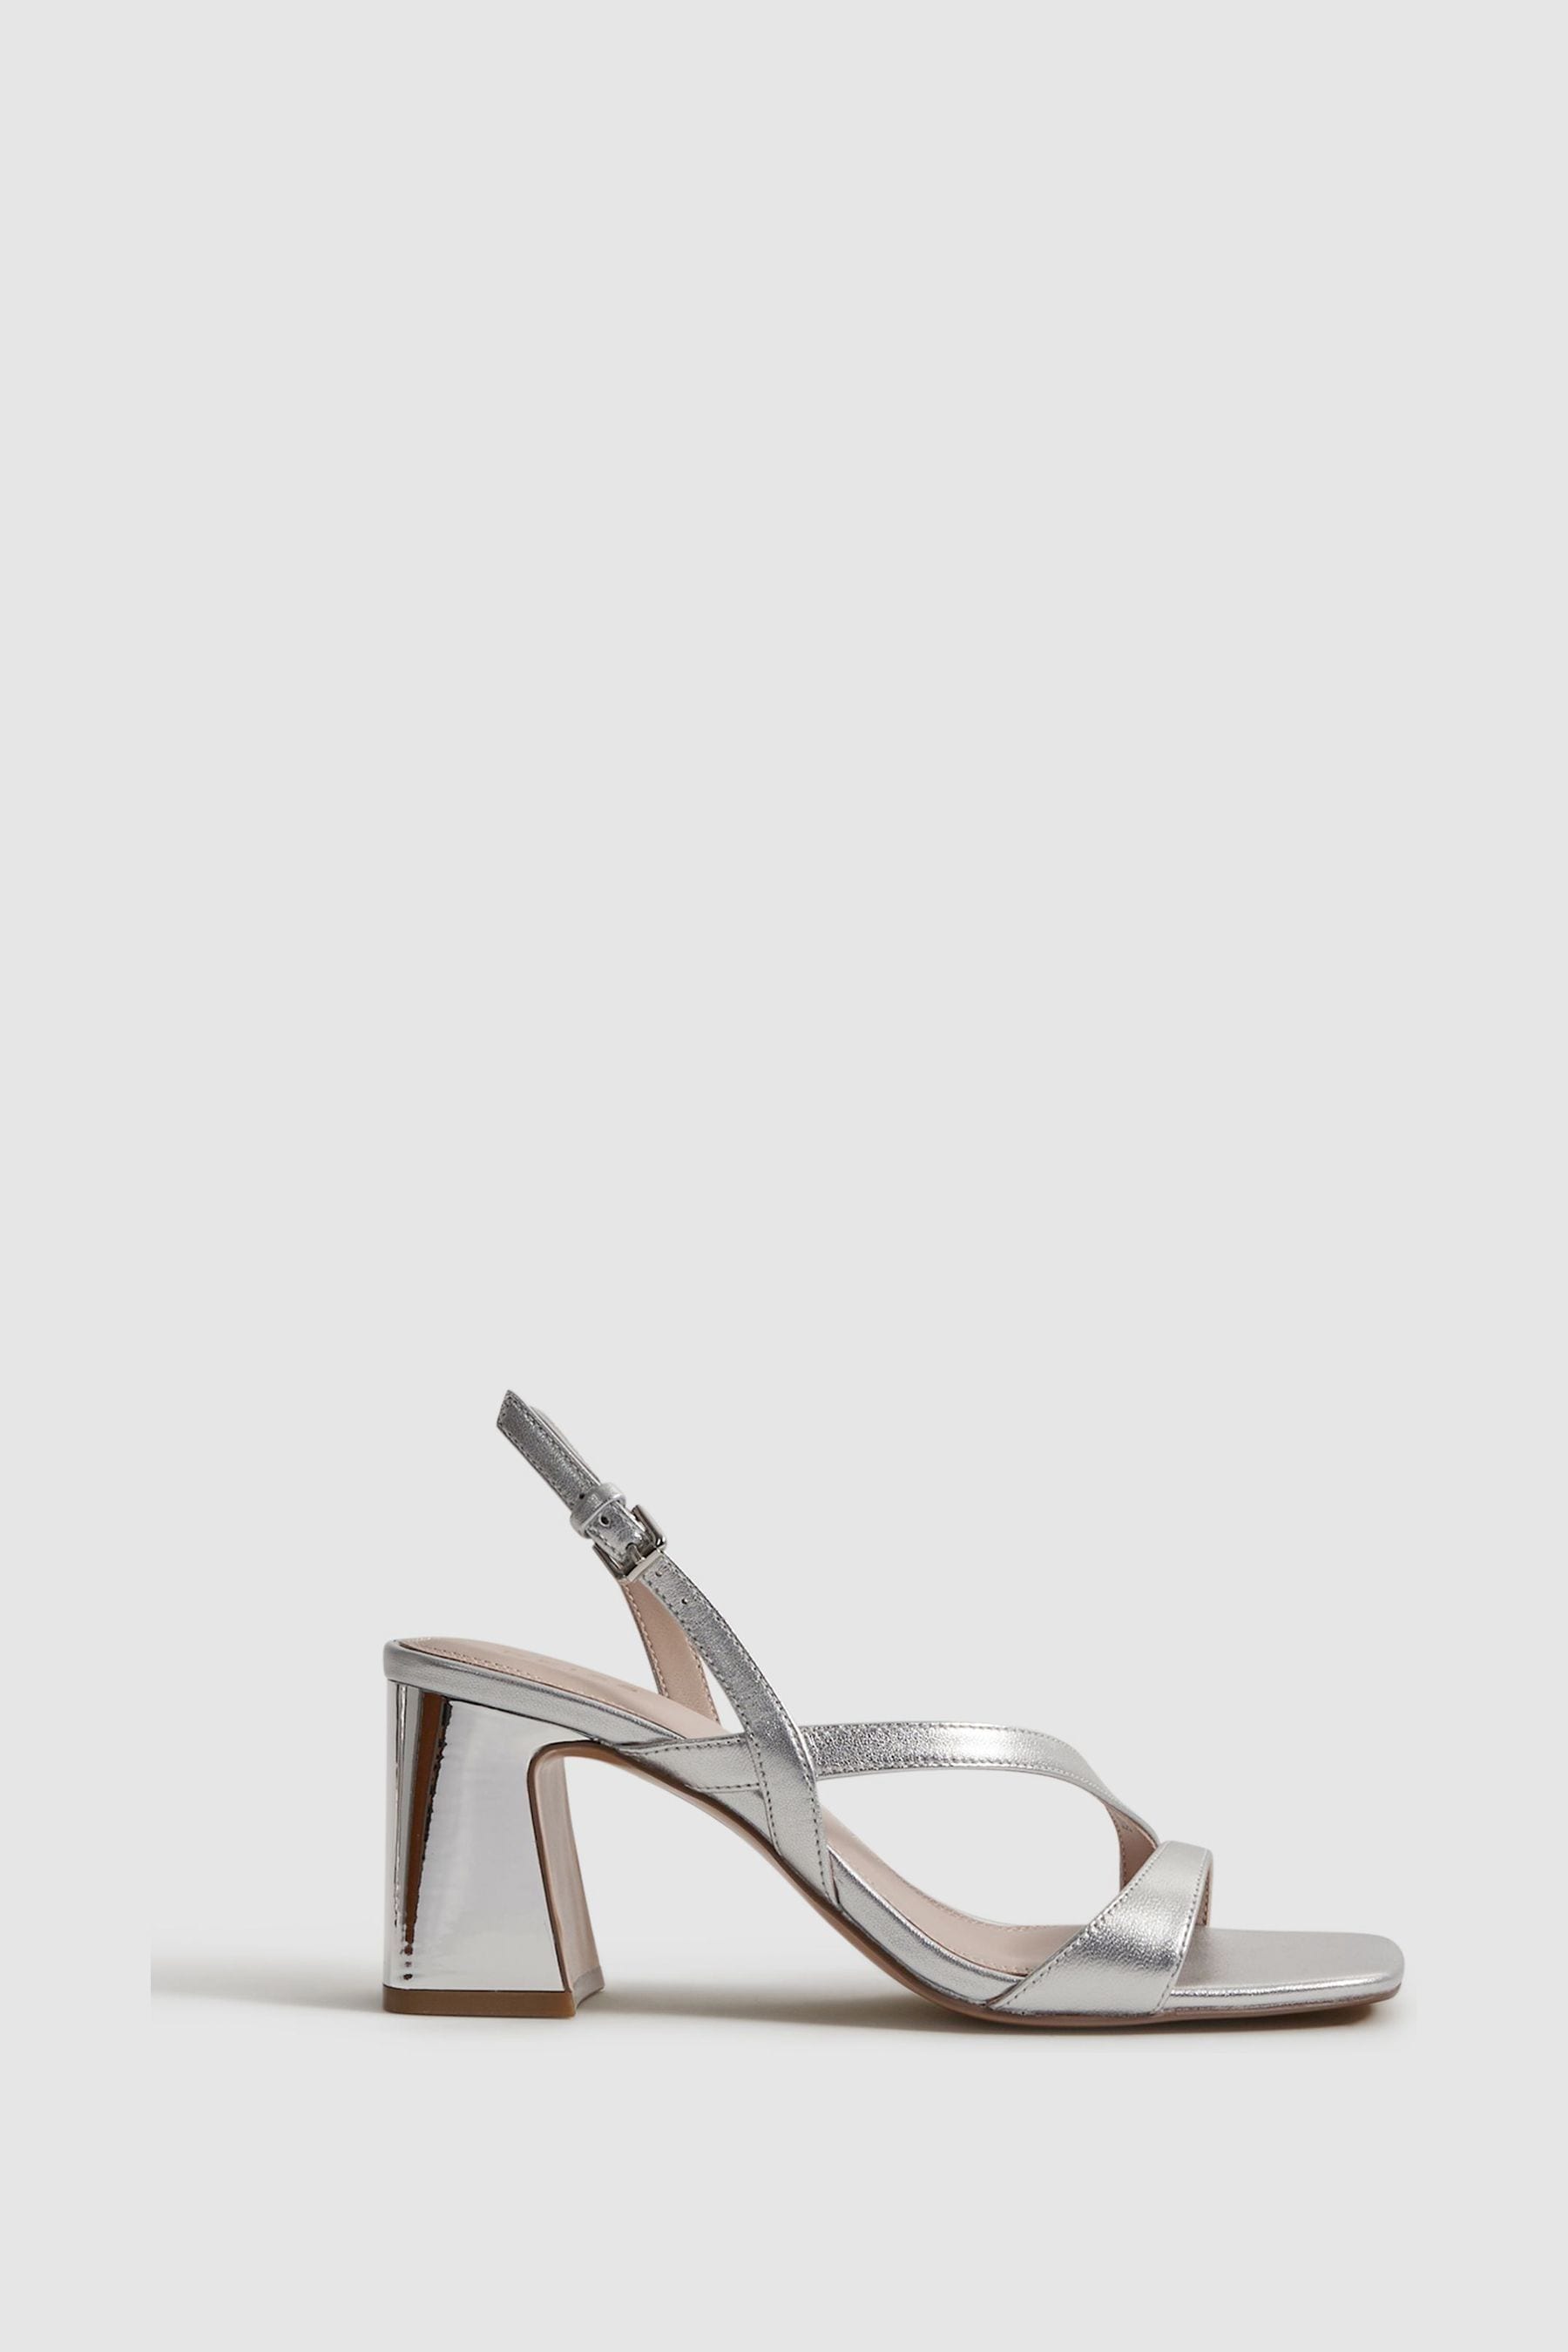 Reiss Alice - Silver Strappy Leather Heeled Sandals, Us 8